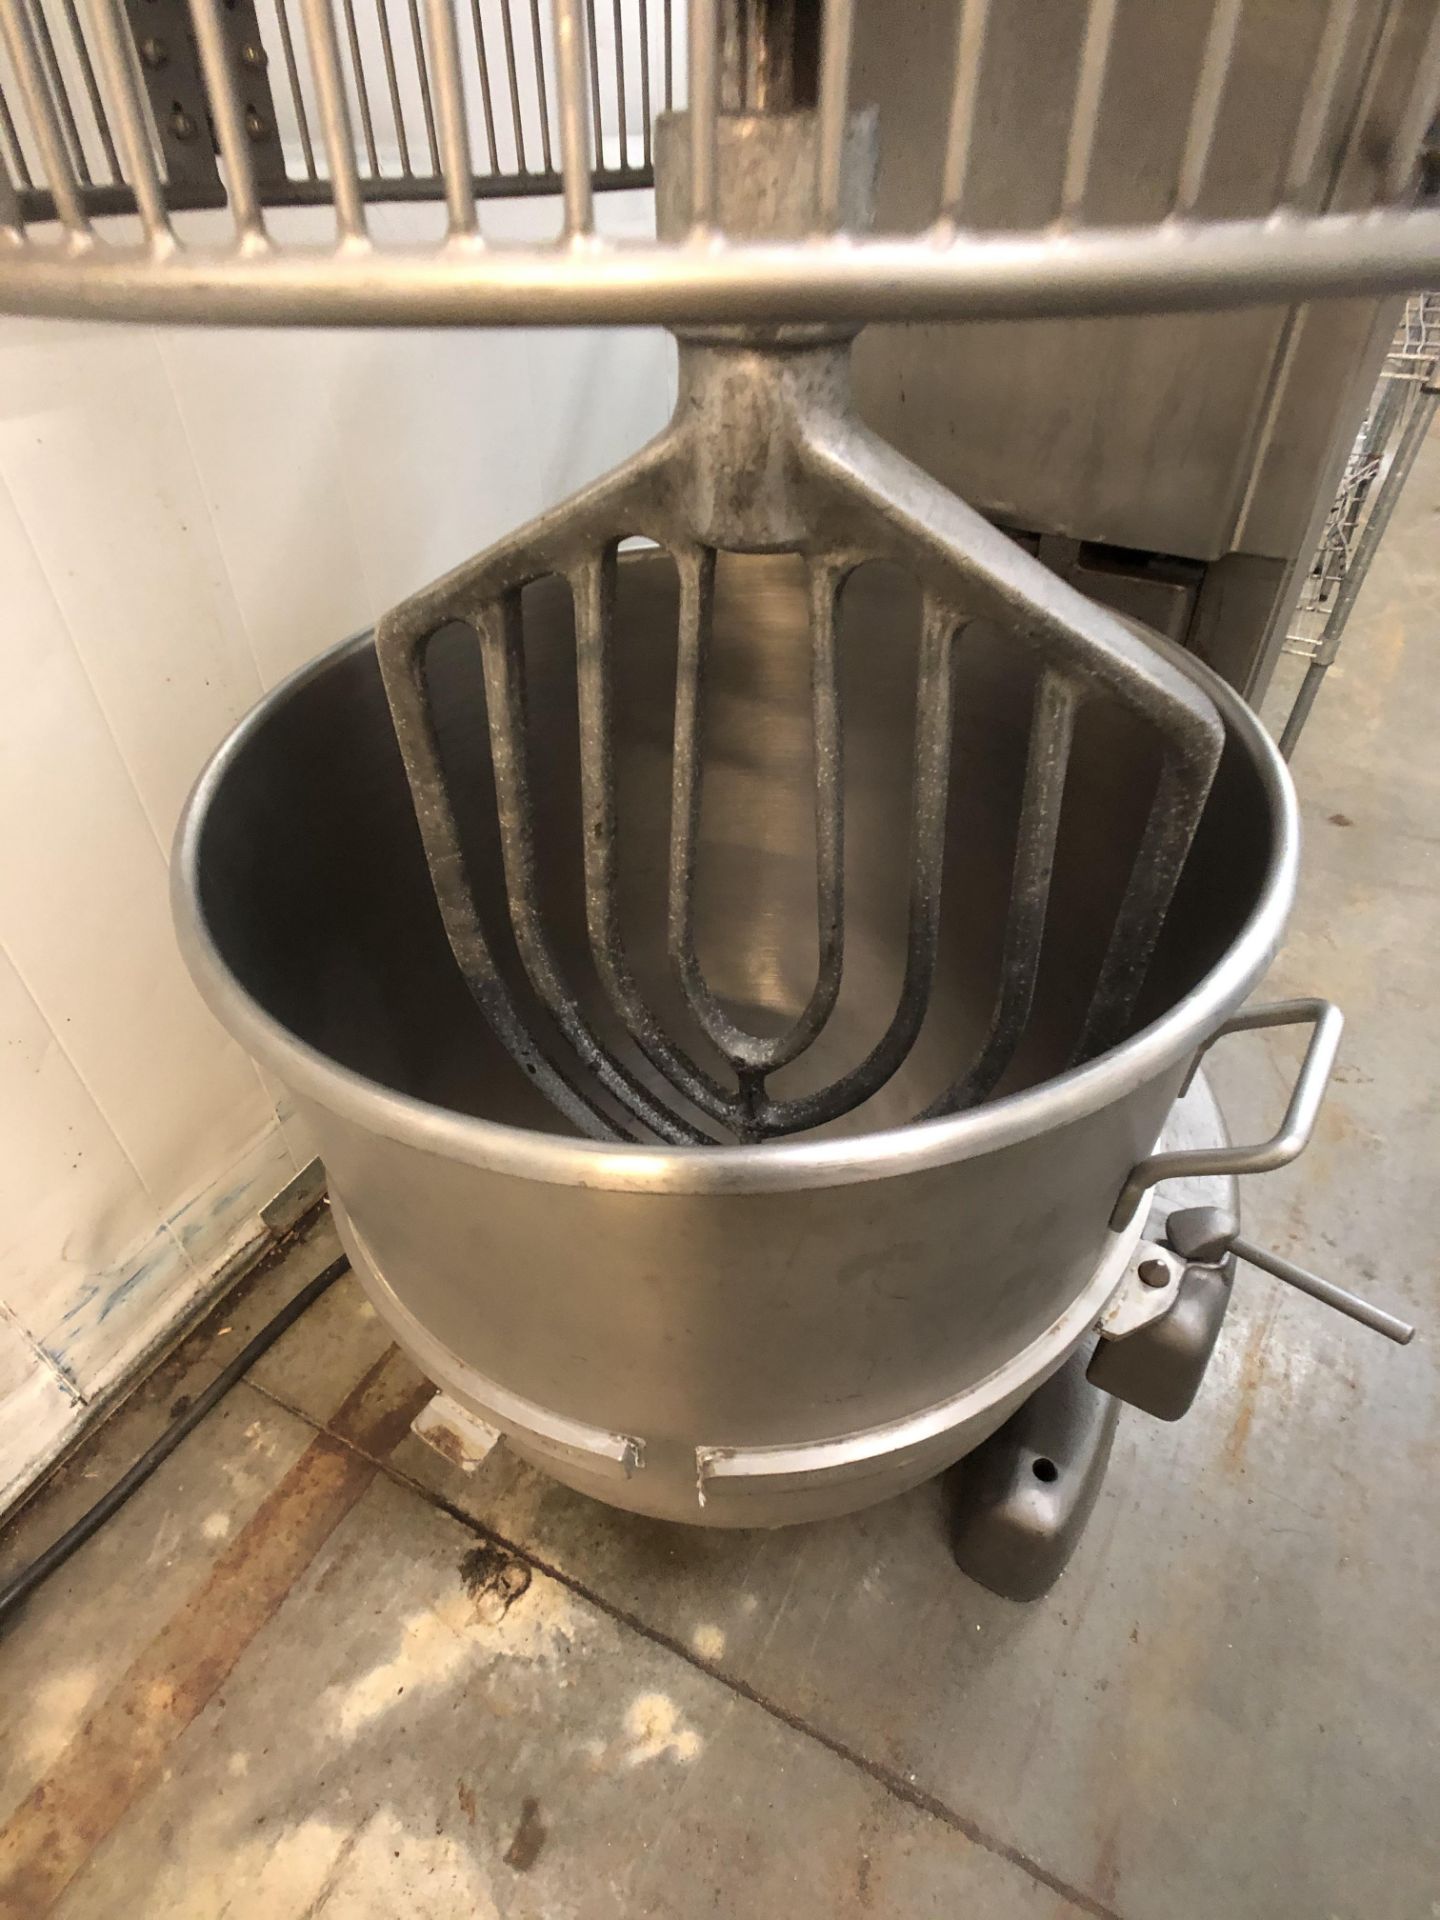 HOBART MIXER MODEL V1401 W/ BOWL 140 Qt. AND BEATER ATTACHMENT - Image 3 of 8